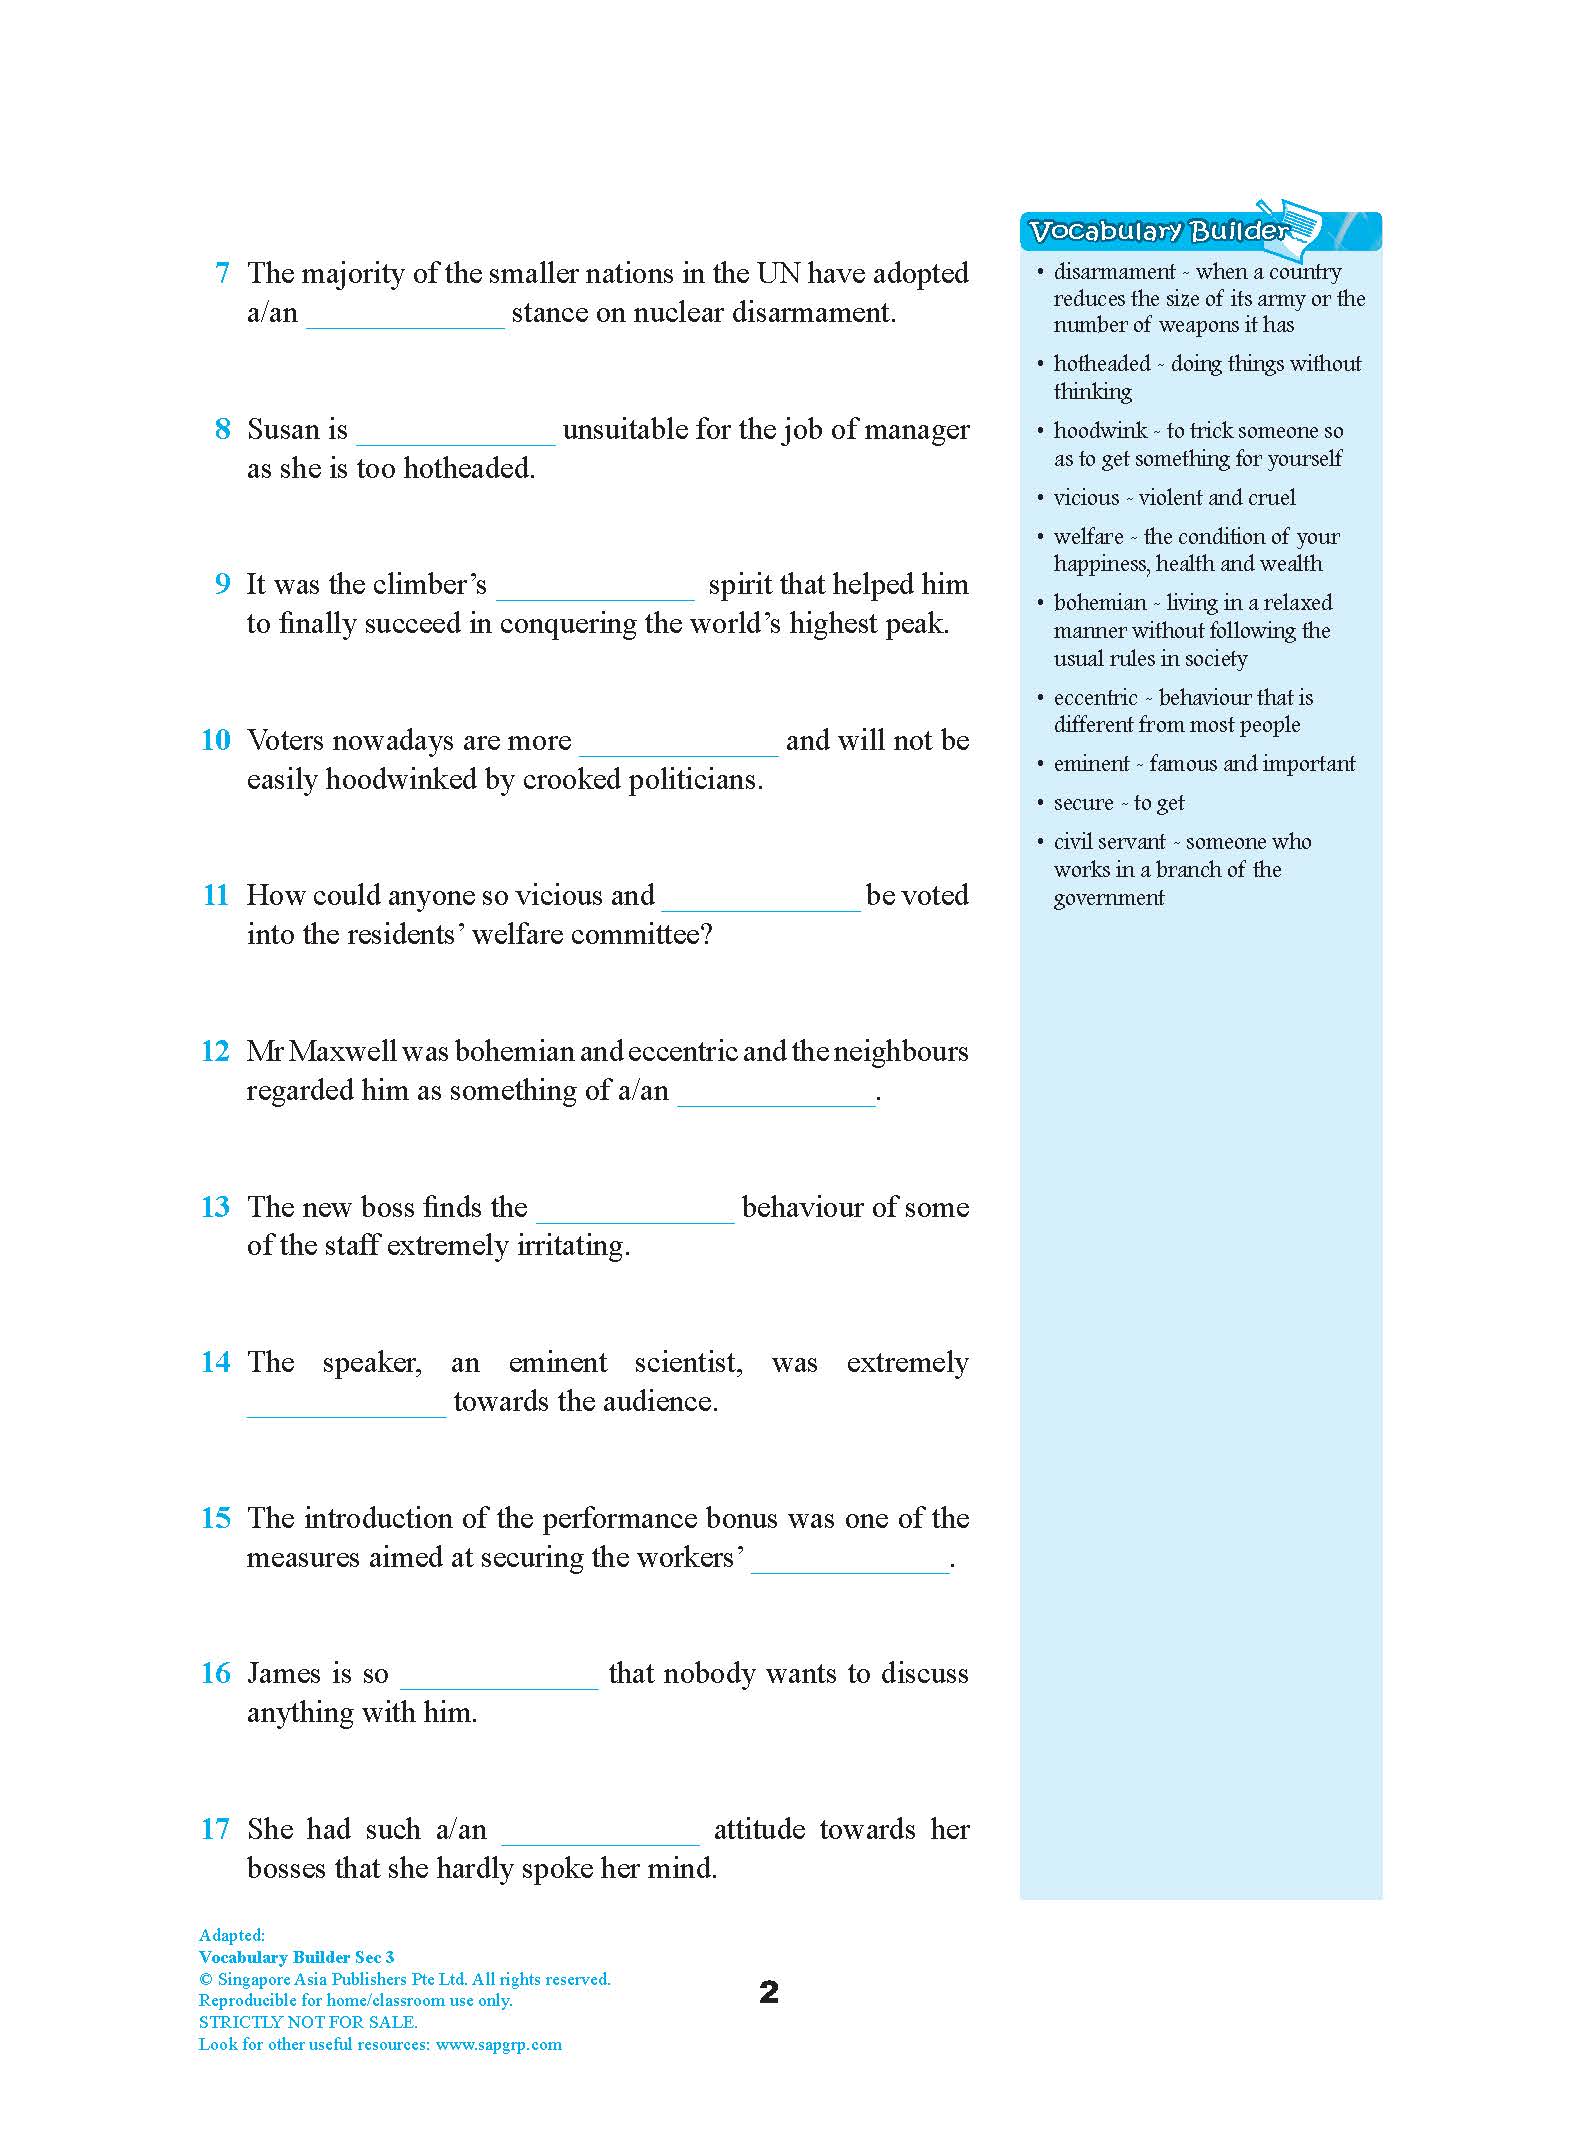 Strengthen English Idioms for Secondary, Idioms, Bright Education Australia, Book, Grammar, English, School Materials, Activities, Teaching Resources Level, 